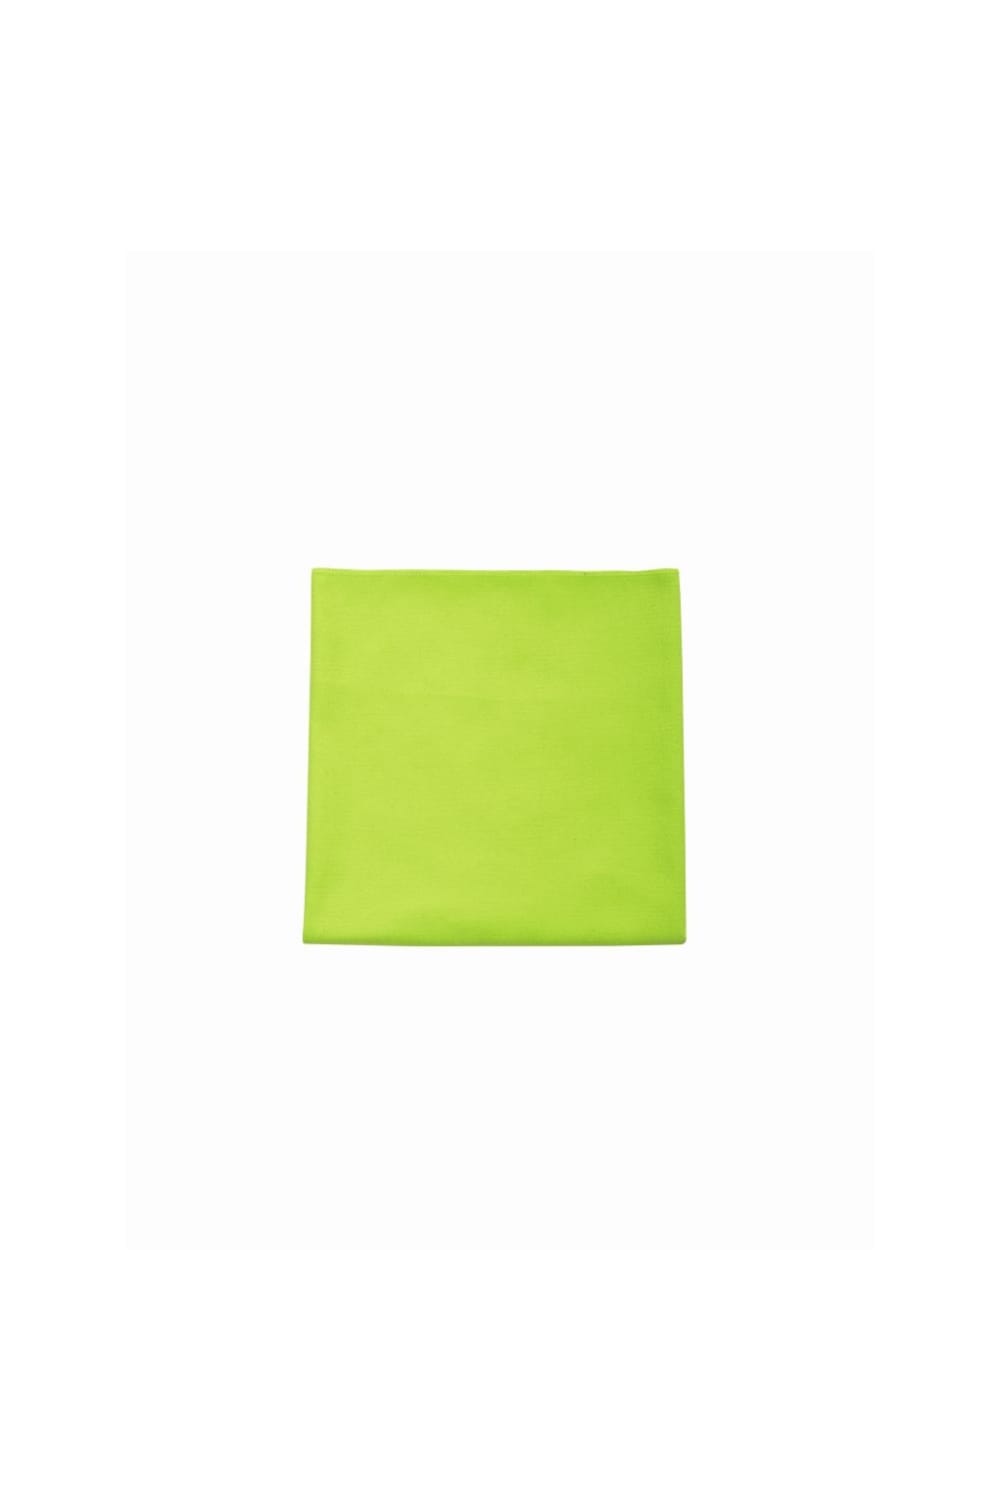 SOLS Atoll 30 Microfiber Guest Towel (Apple Green) (12 x 20 in)